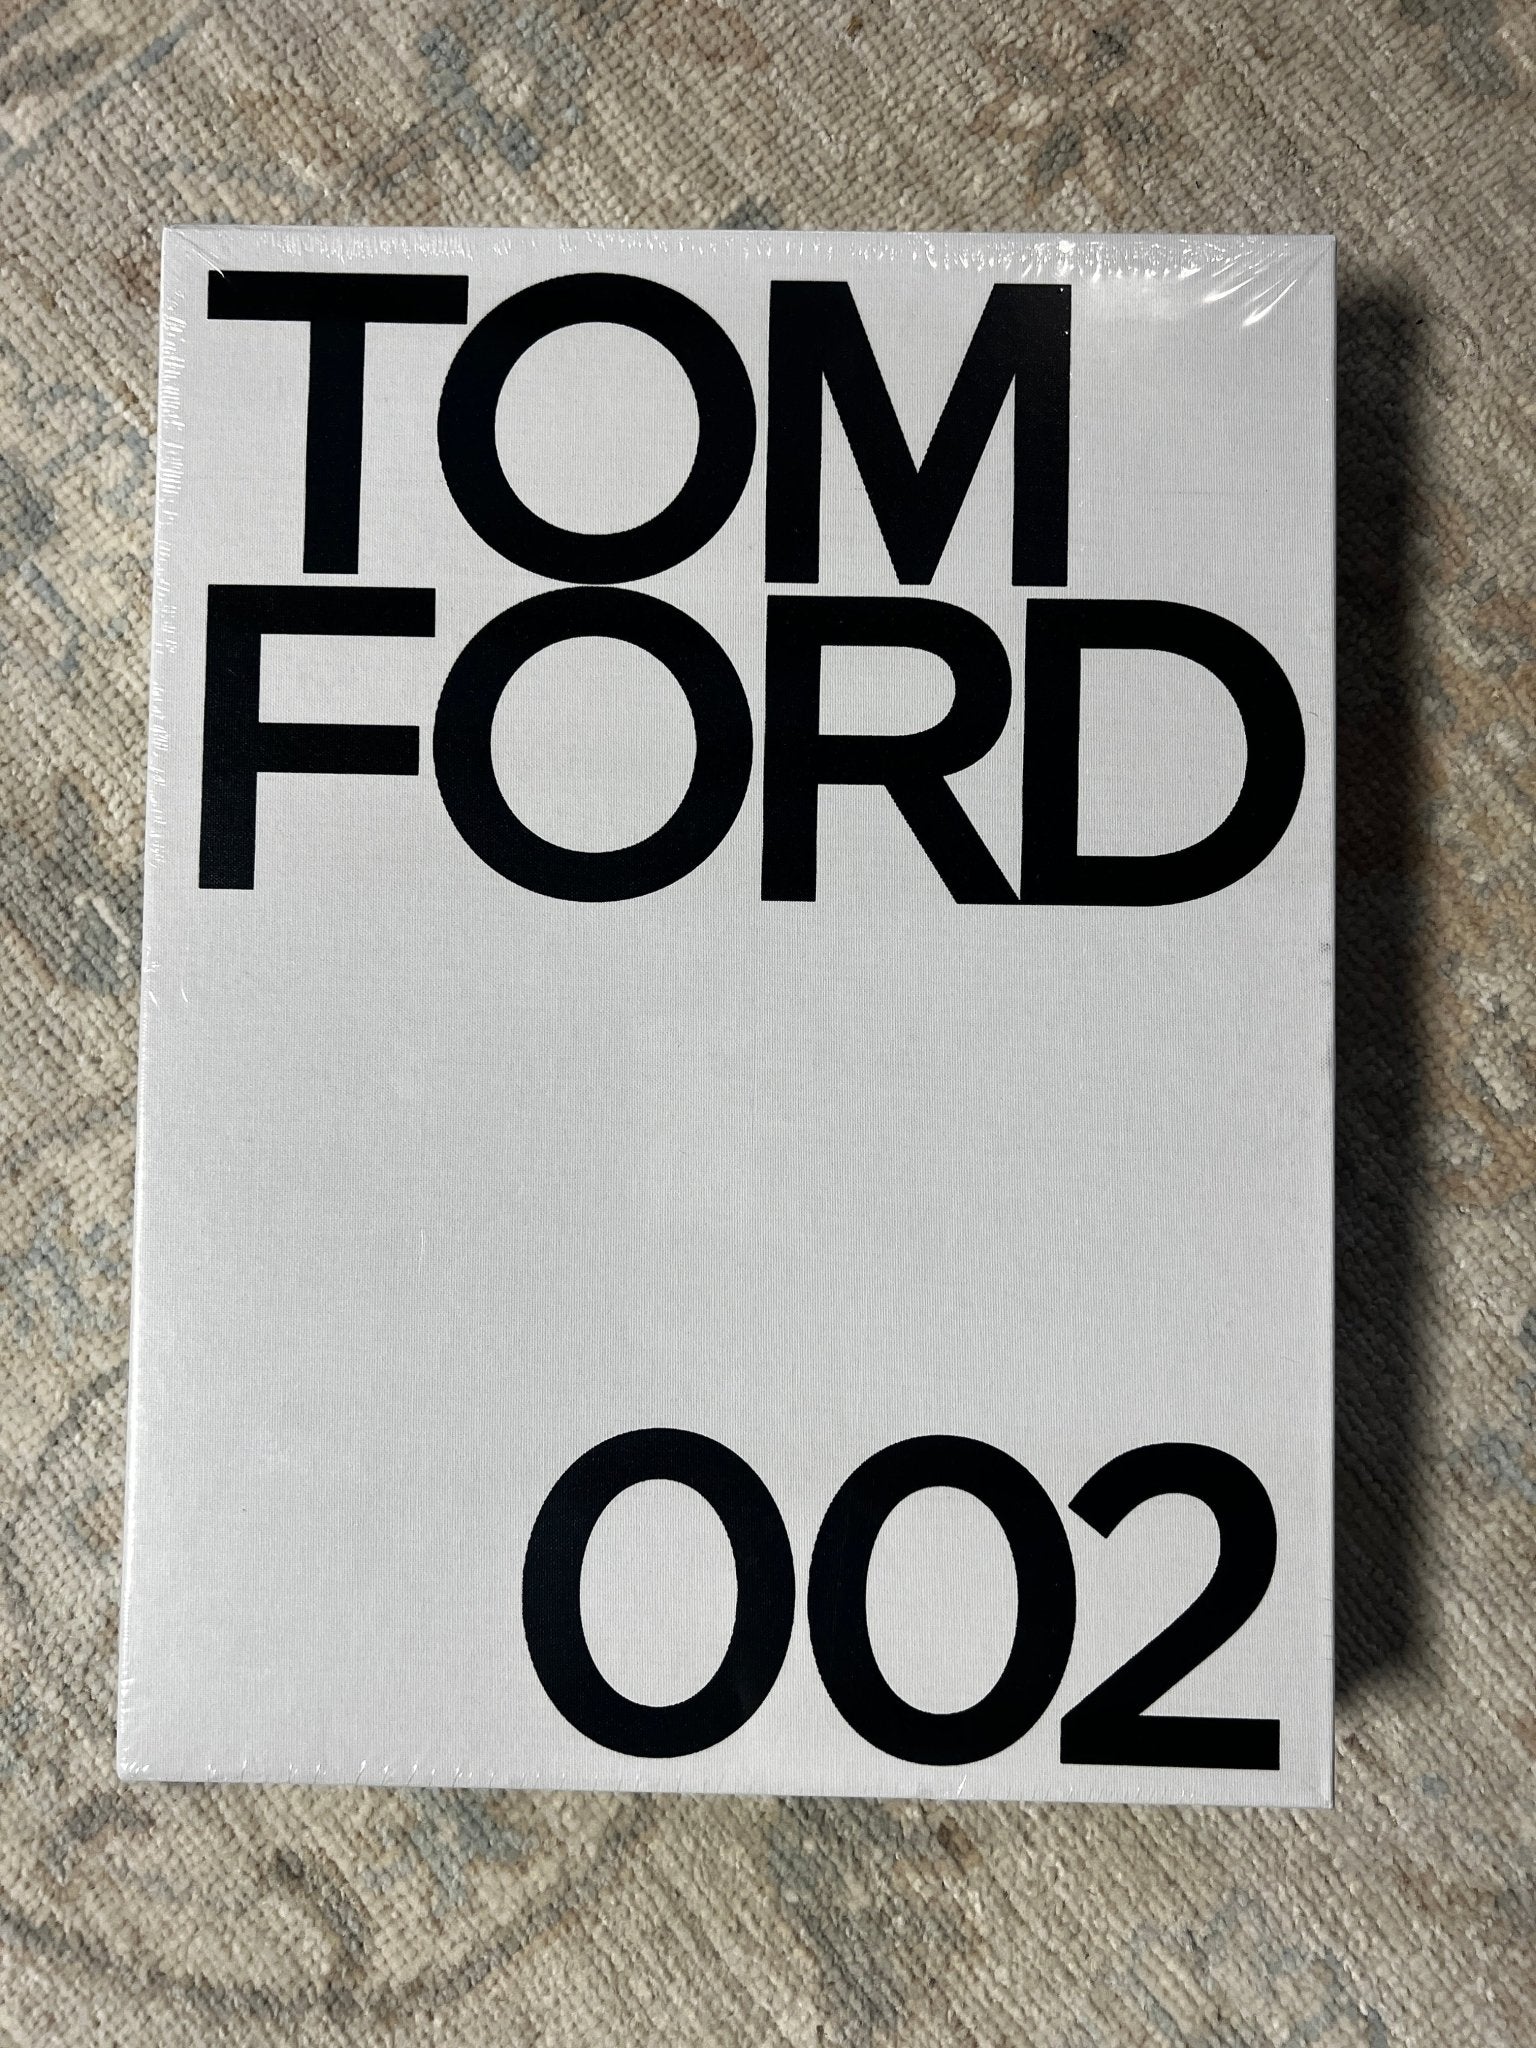 Tom Ford 002 Iconic Fashion Designer Coffee Table Book – Banana Manor Rug  Factory Outlet